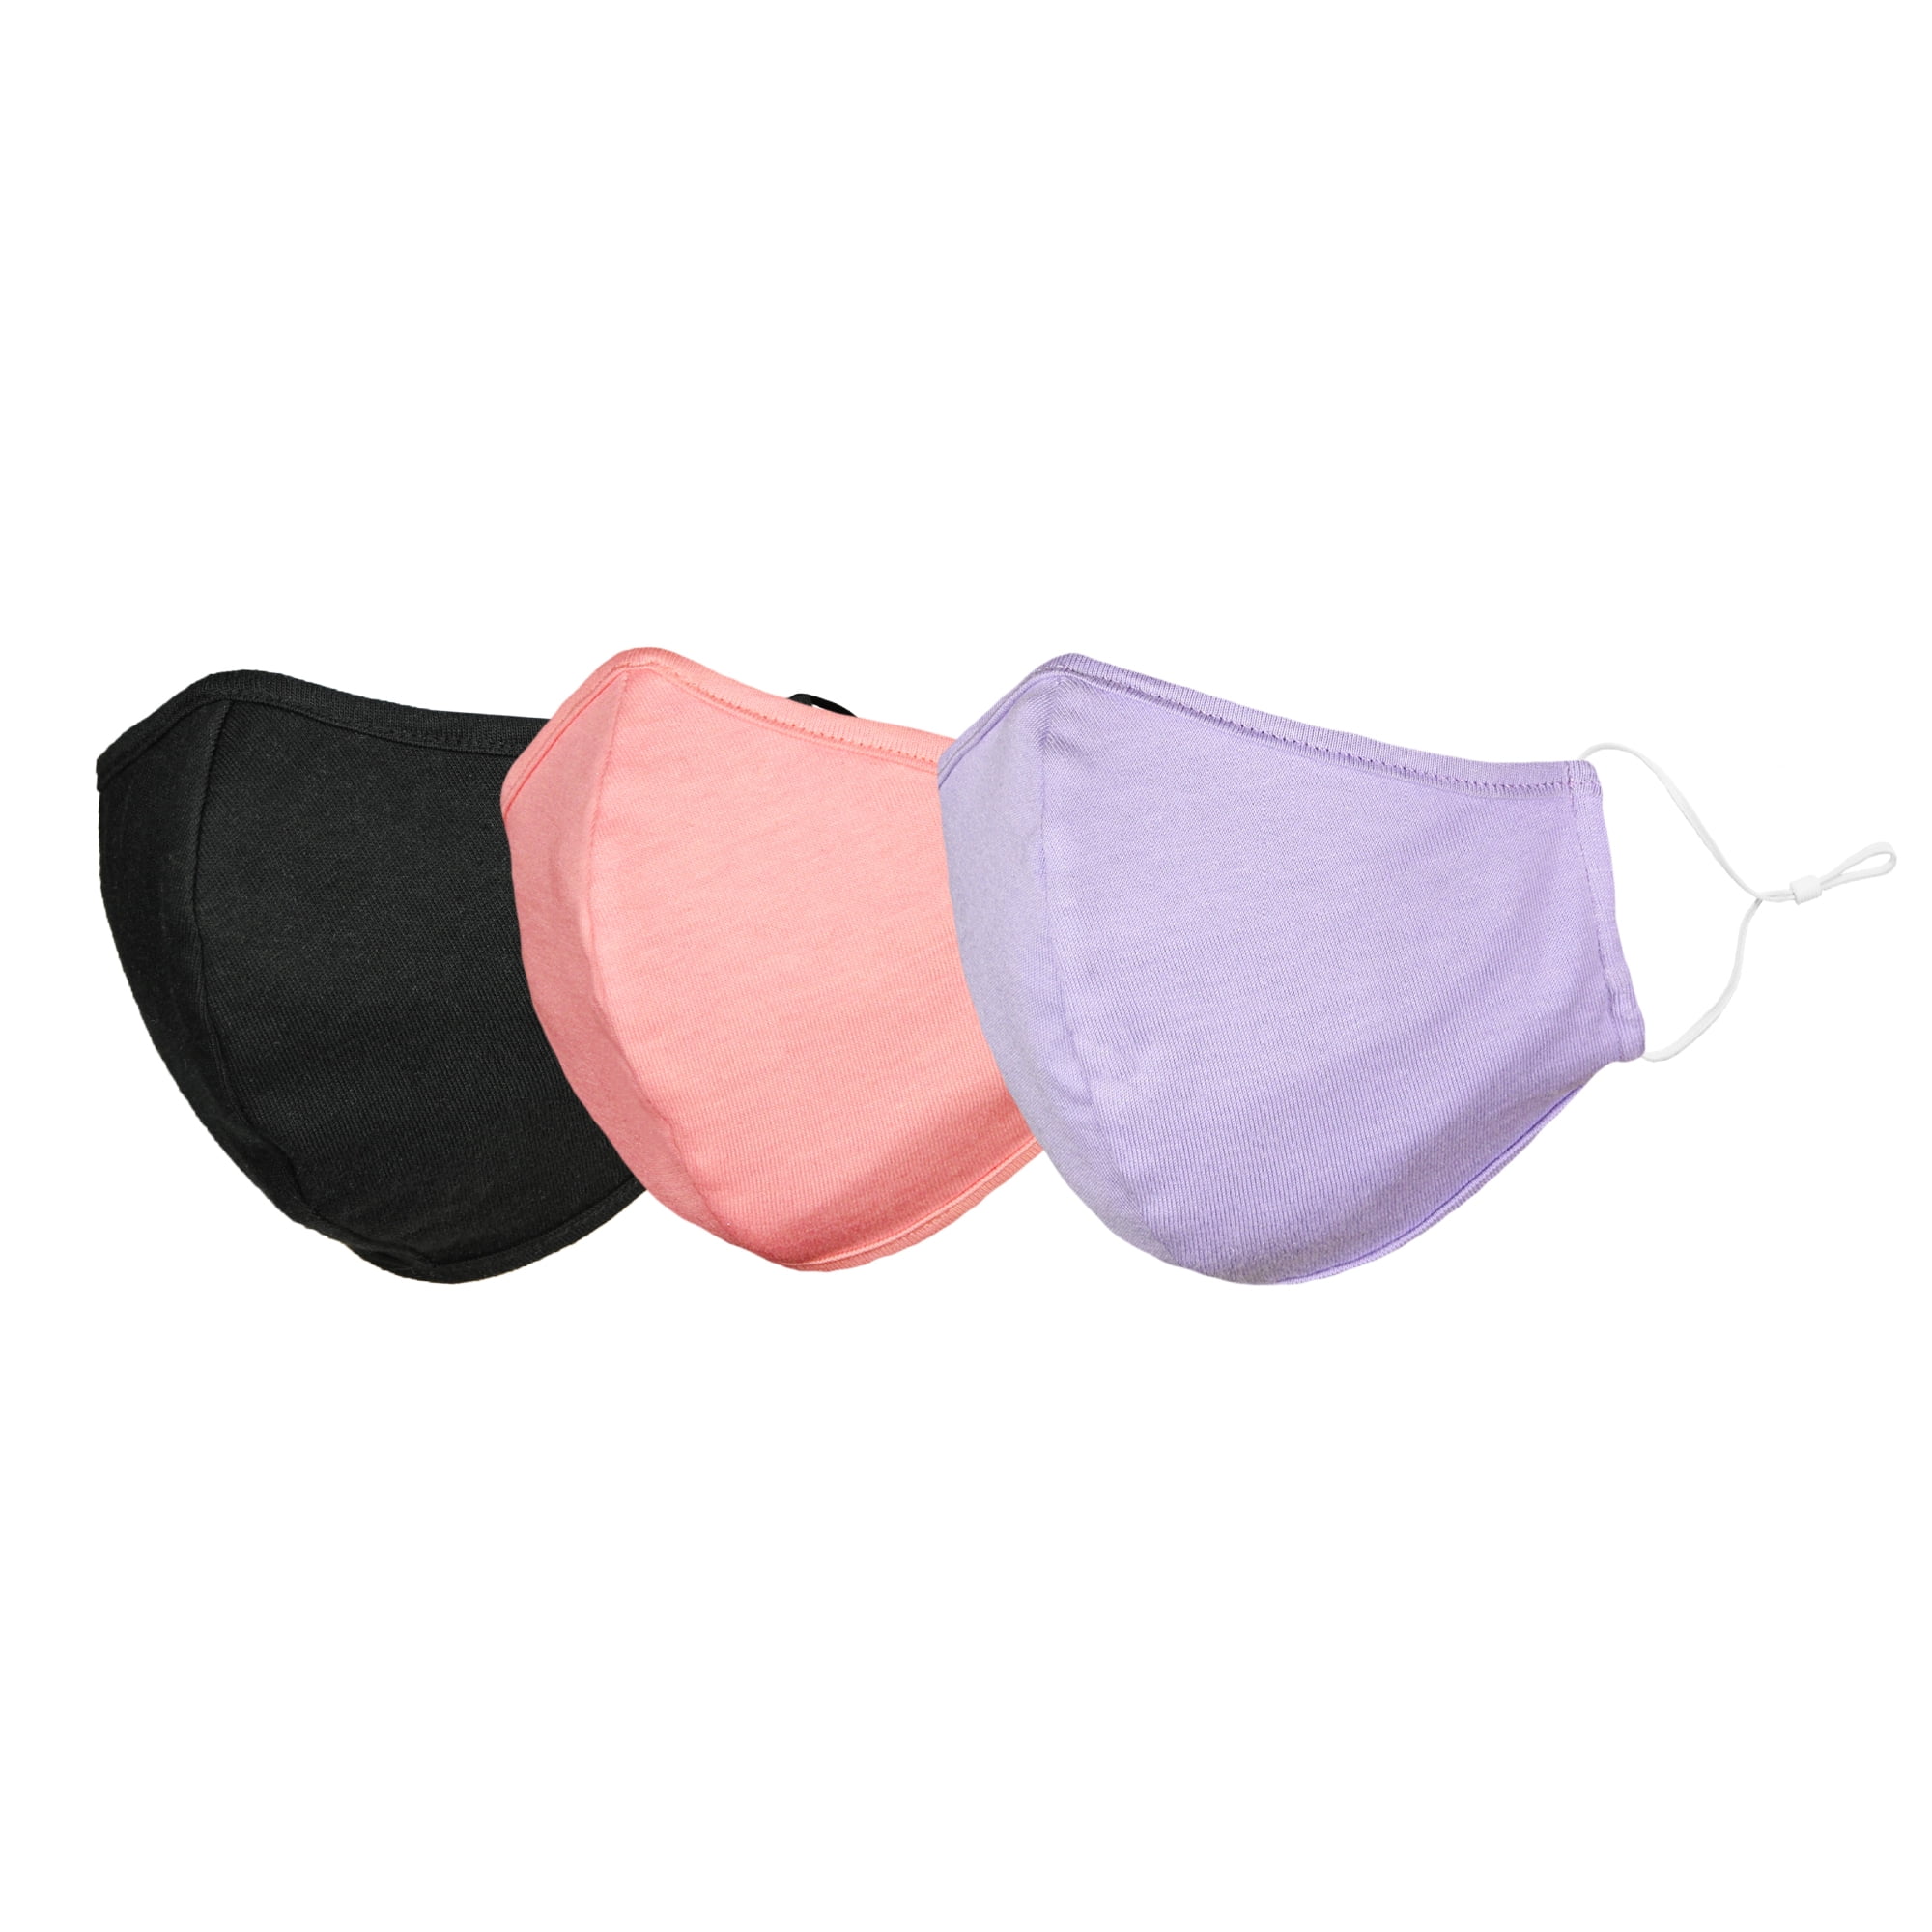 DALIX Cloth Face Mask Reuseable Washable in Assorted Colors Made in USA - S-M Size (3 Pack)